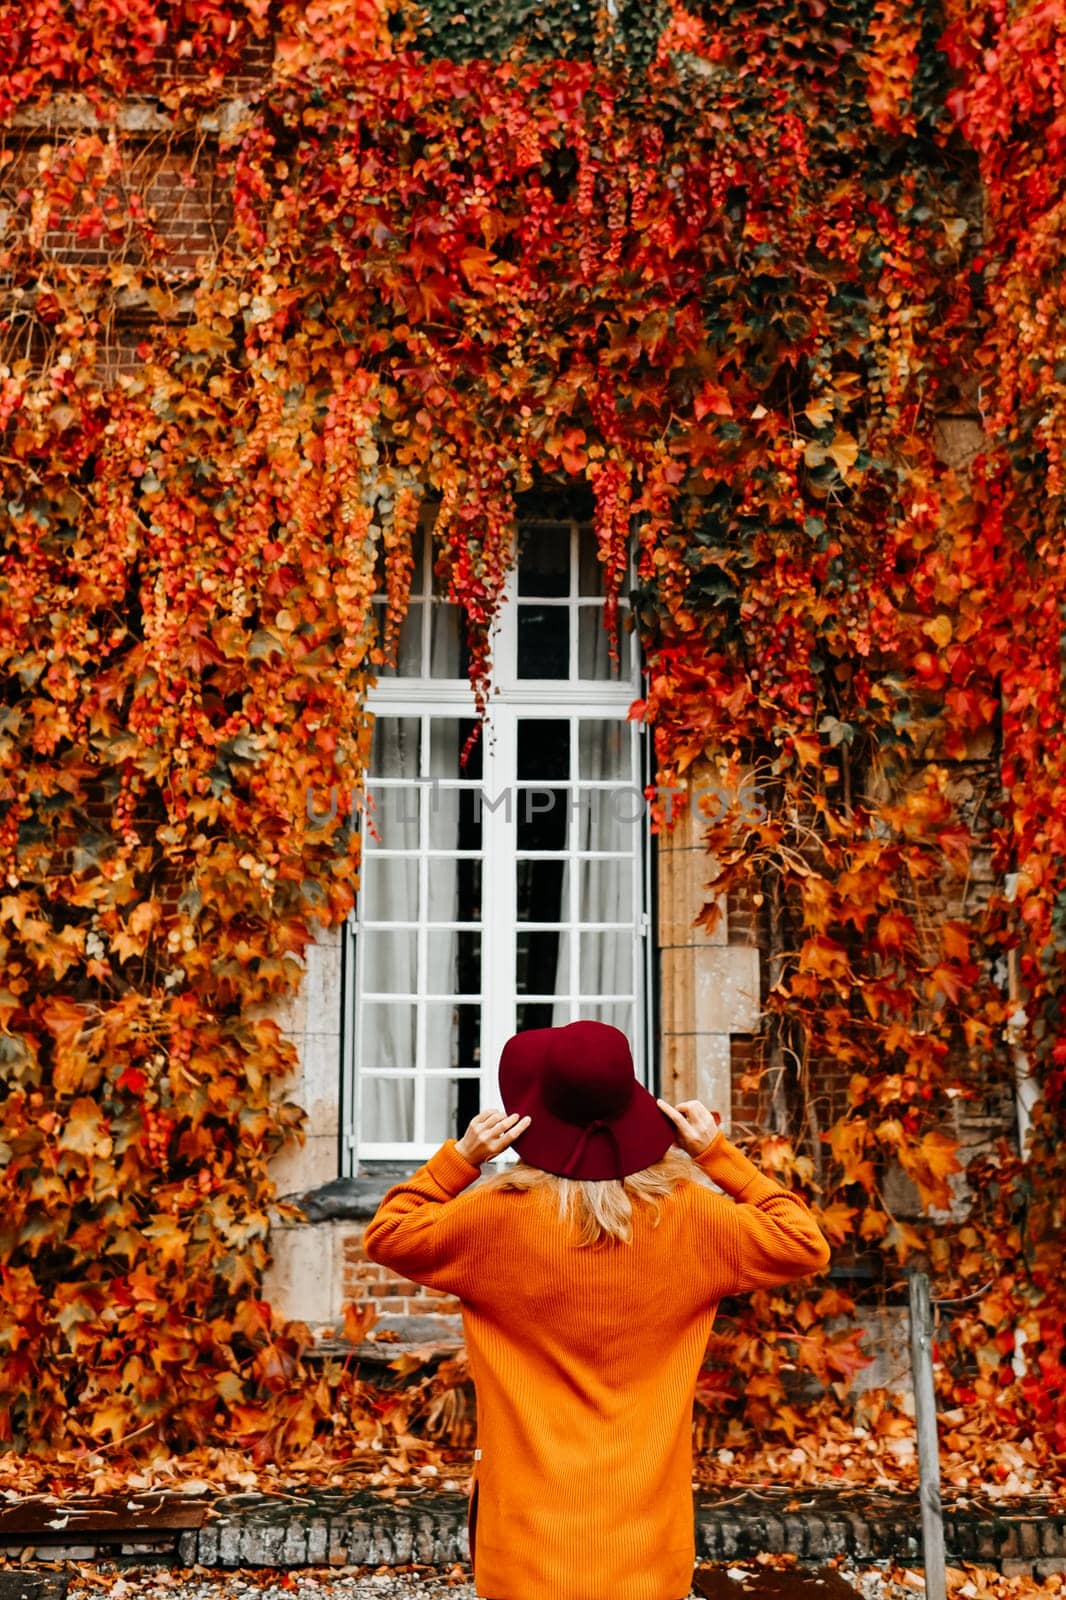 Woman in an orange sweater near a wall with wild grapes in autumn